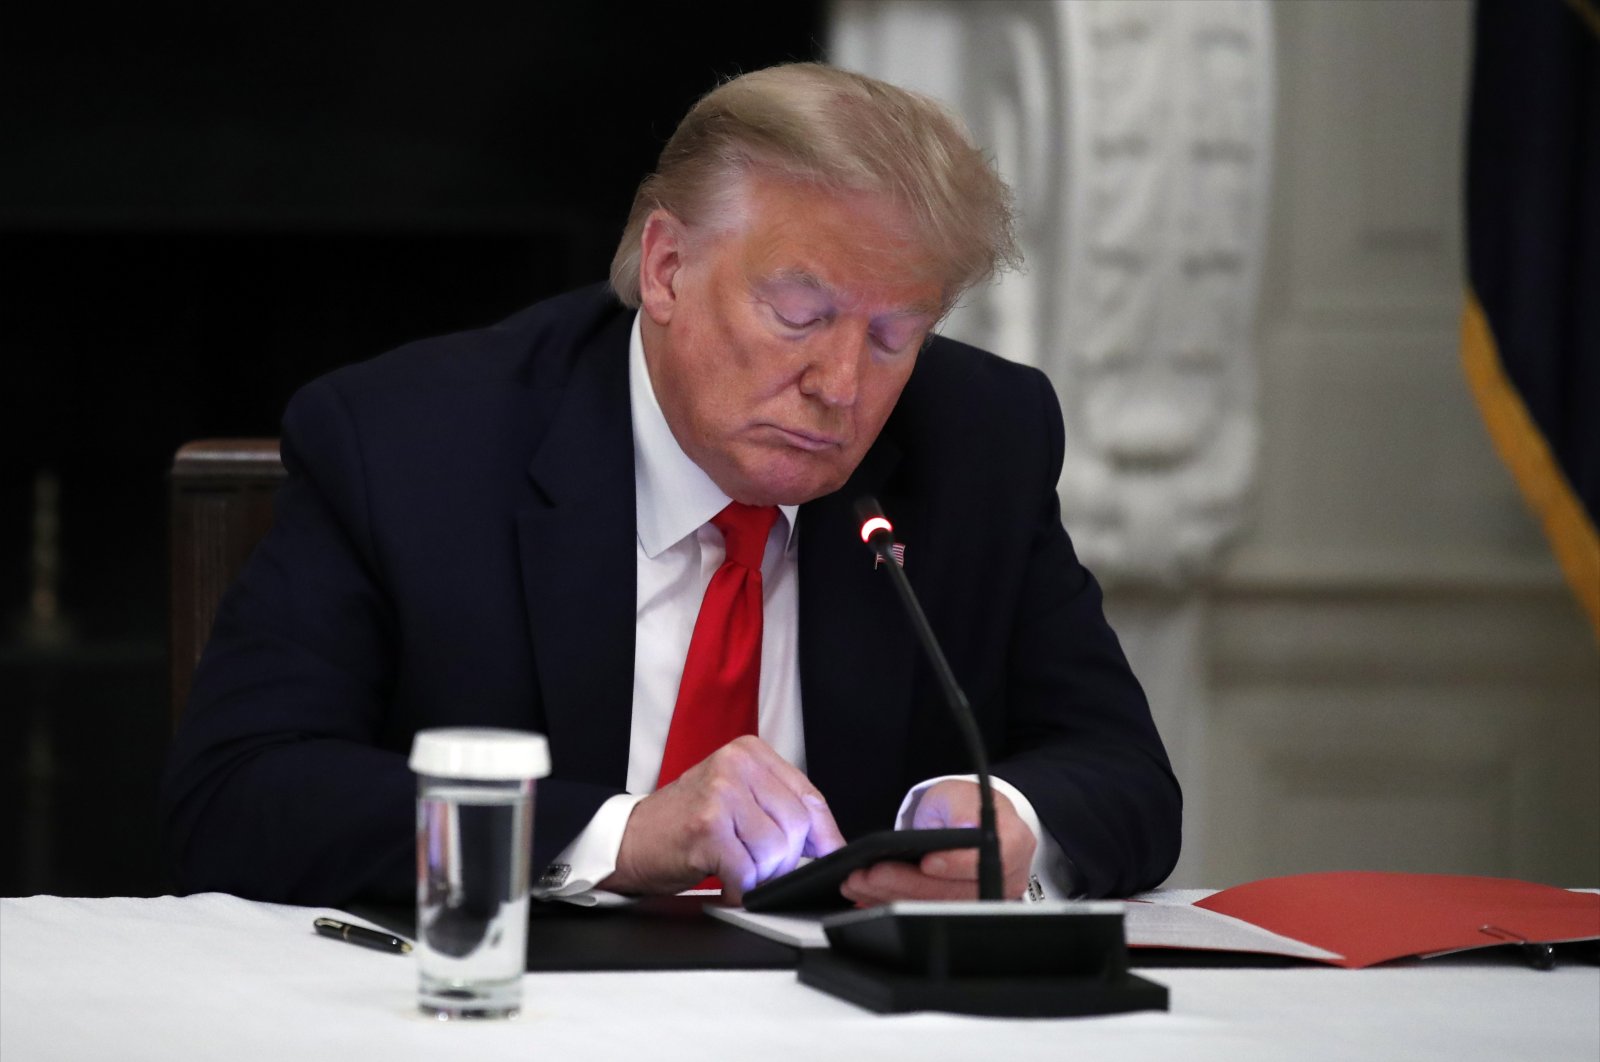 U.S. President Donald Trump looks at his phone during a roundtable with governors on the reopening of America's small businesses, in the State Dining Room of the White House in Washington, D.C., June 18, 2020. (AP Photo)